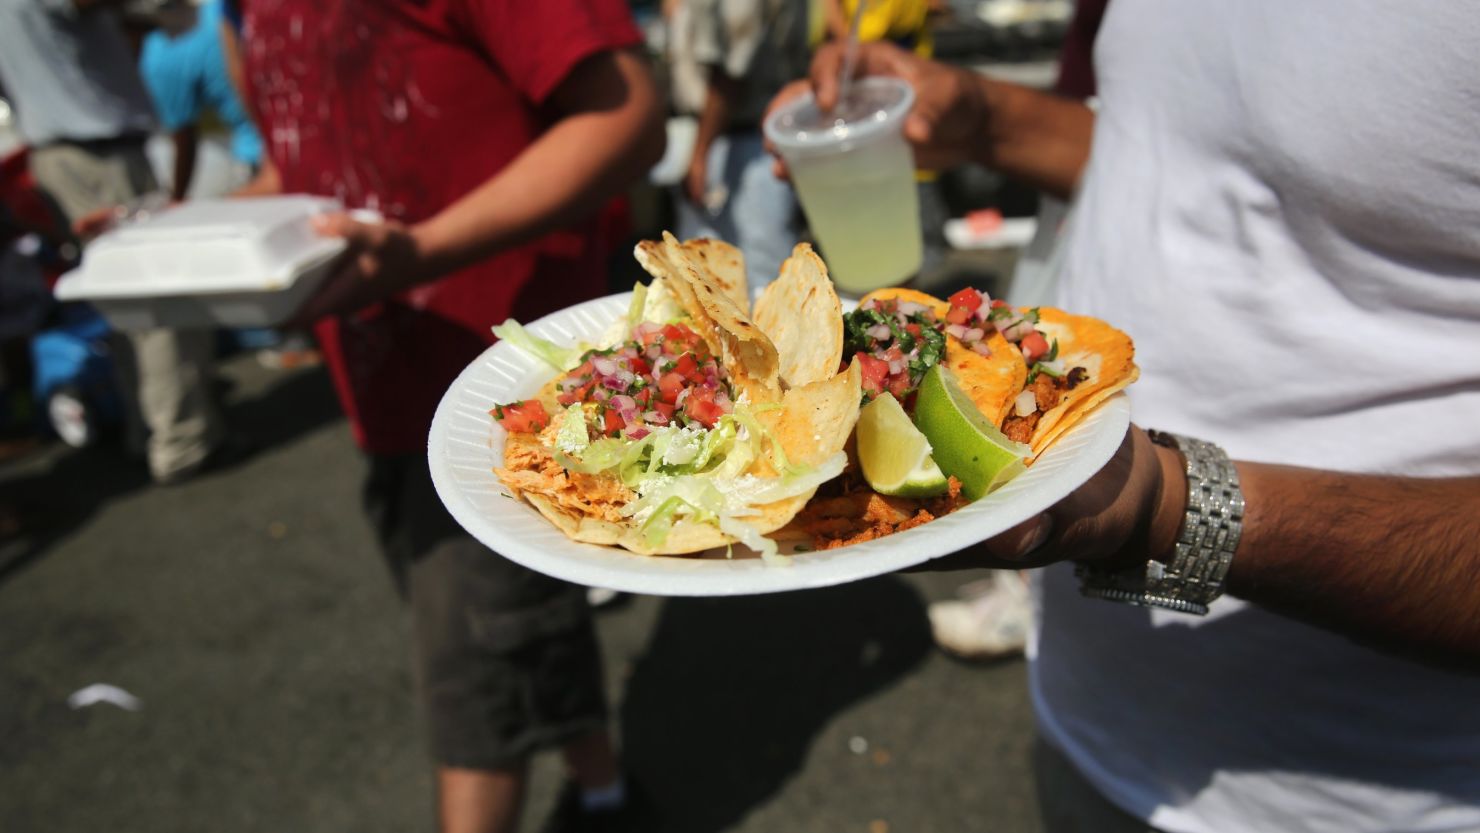 A man carries a plate of tacos on July 20, 2014 in Valhalla, New York.